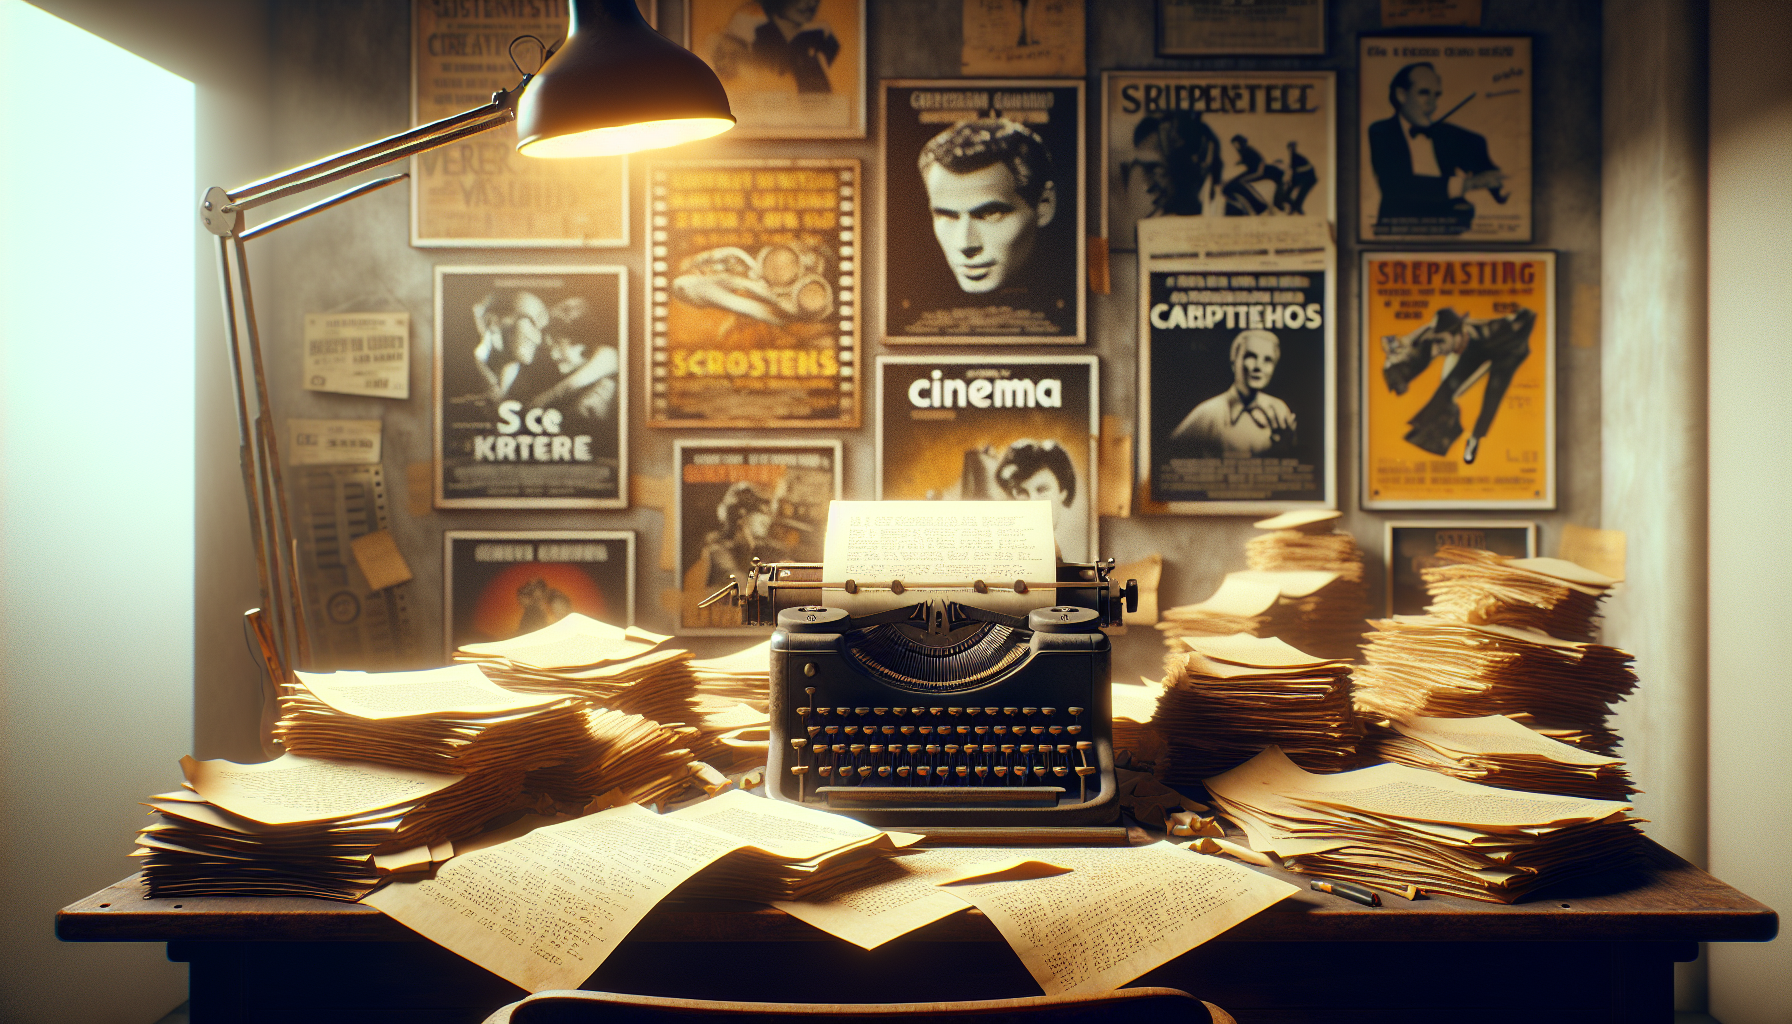 A vintage typewriter on an old wooden desk, surrounded by scattered pages of film scripts, framed by soft golden lighting; in the background, a wall filled with movie posters from iconic films credite